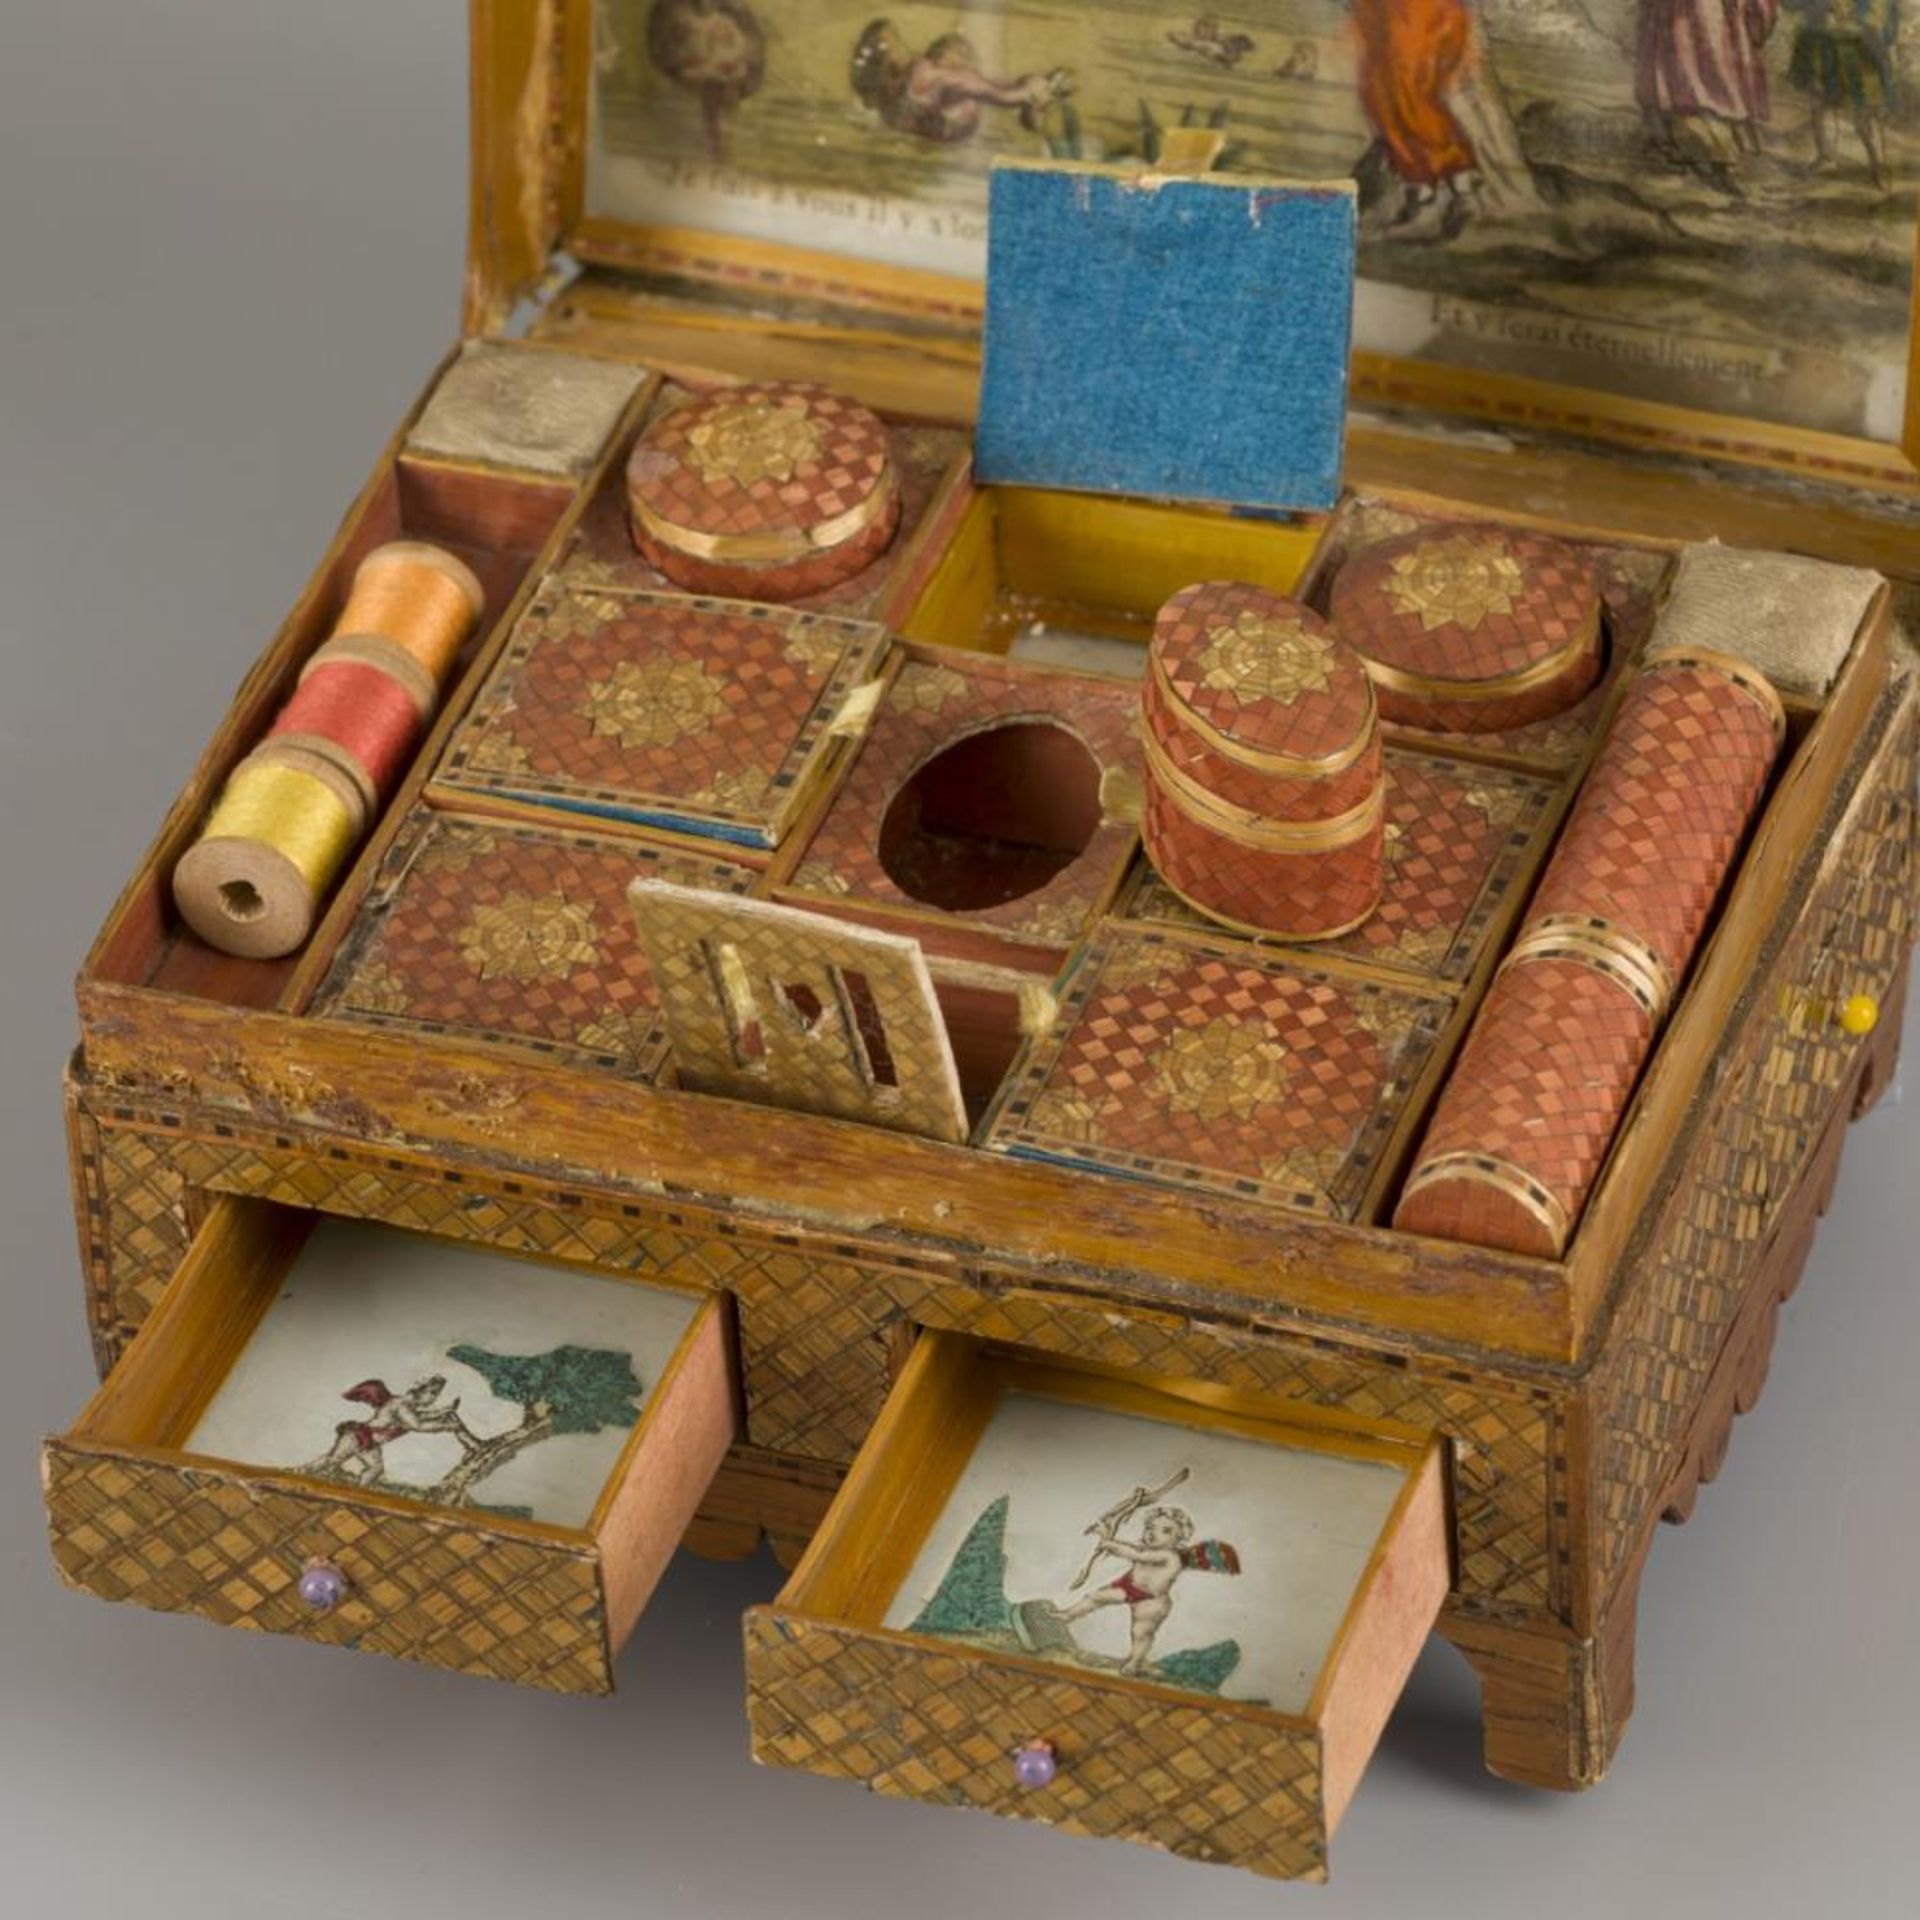 A straw marquetry onlaid sewing box, France, 2nd quarter 19th century. - Image 3 of 3